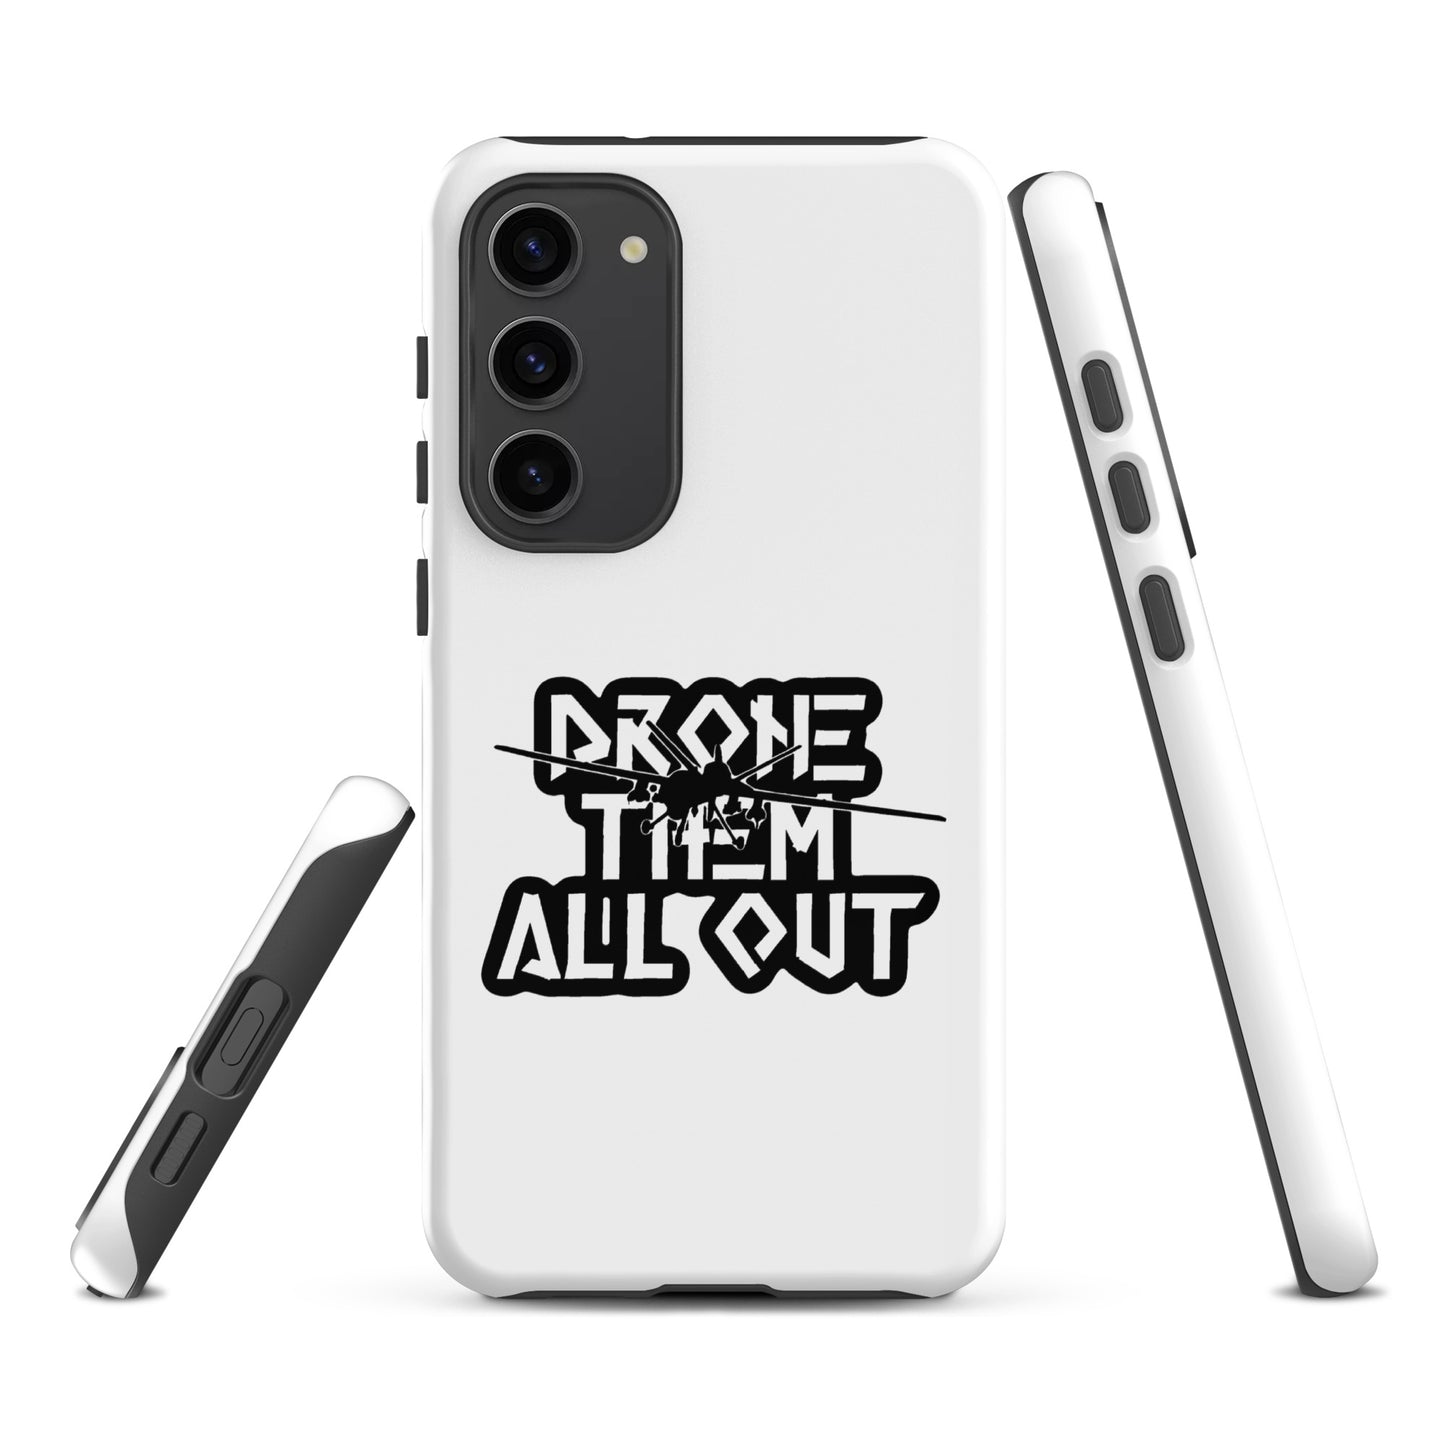 Drone Them Out-Reaper Tough case for Samsung®